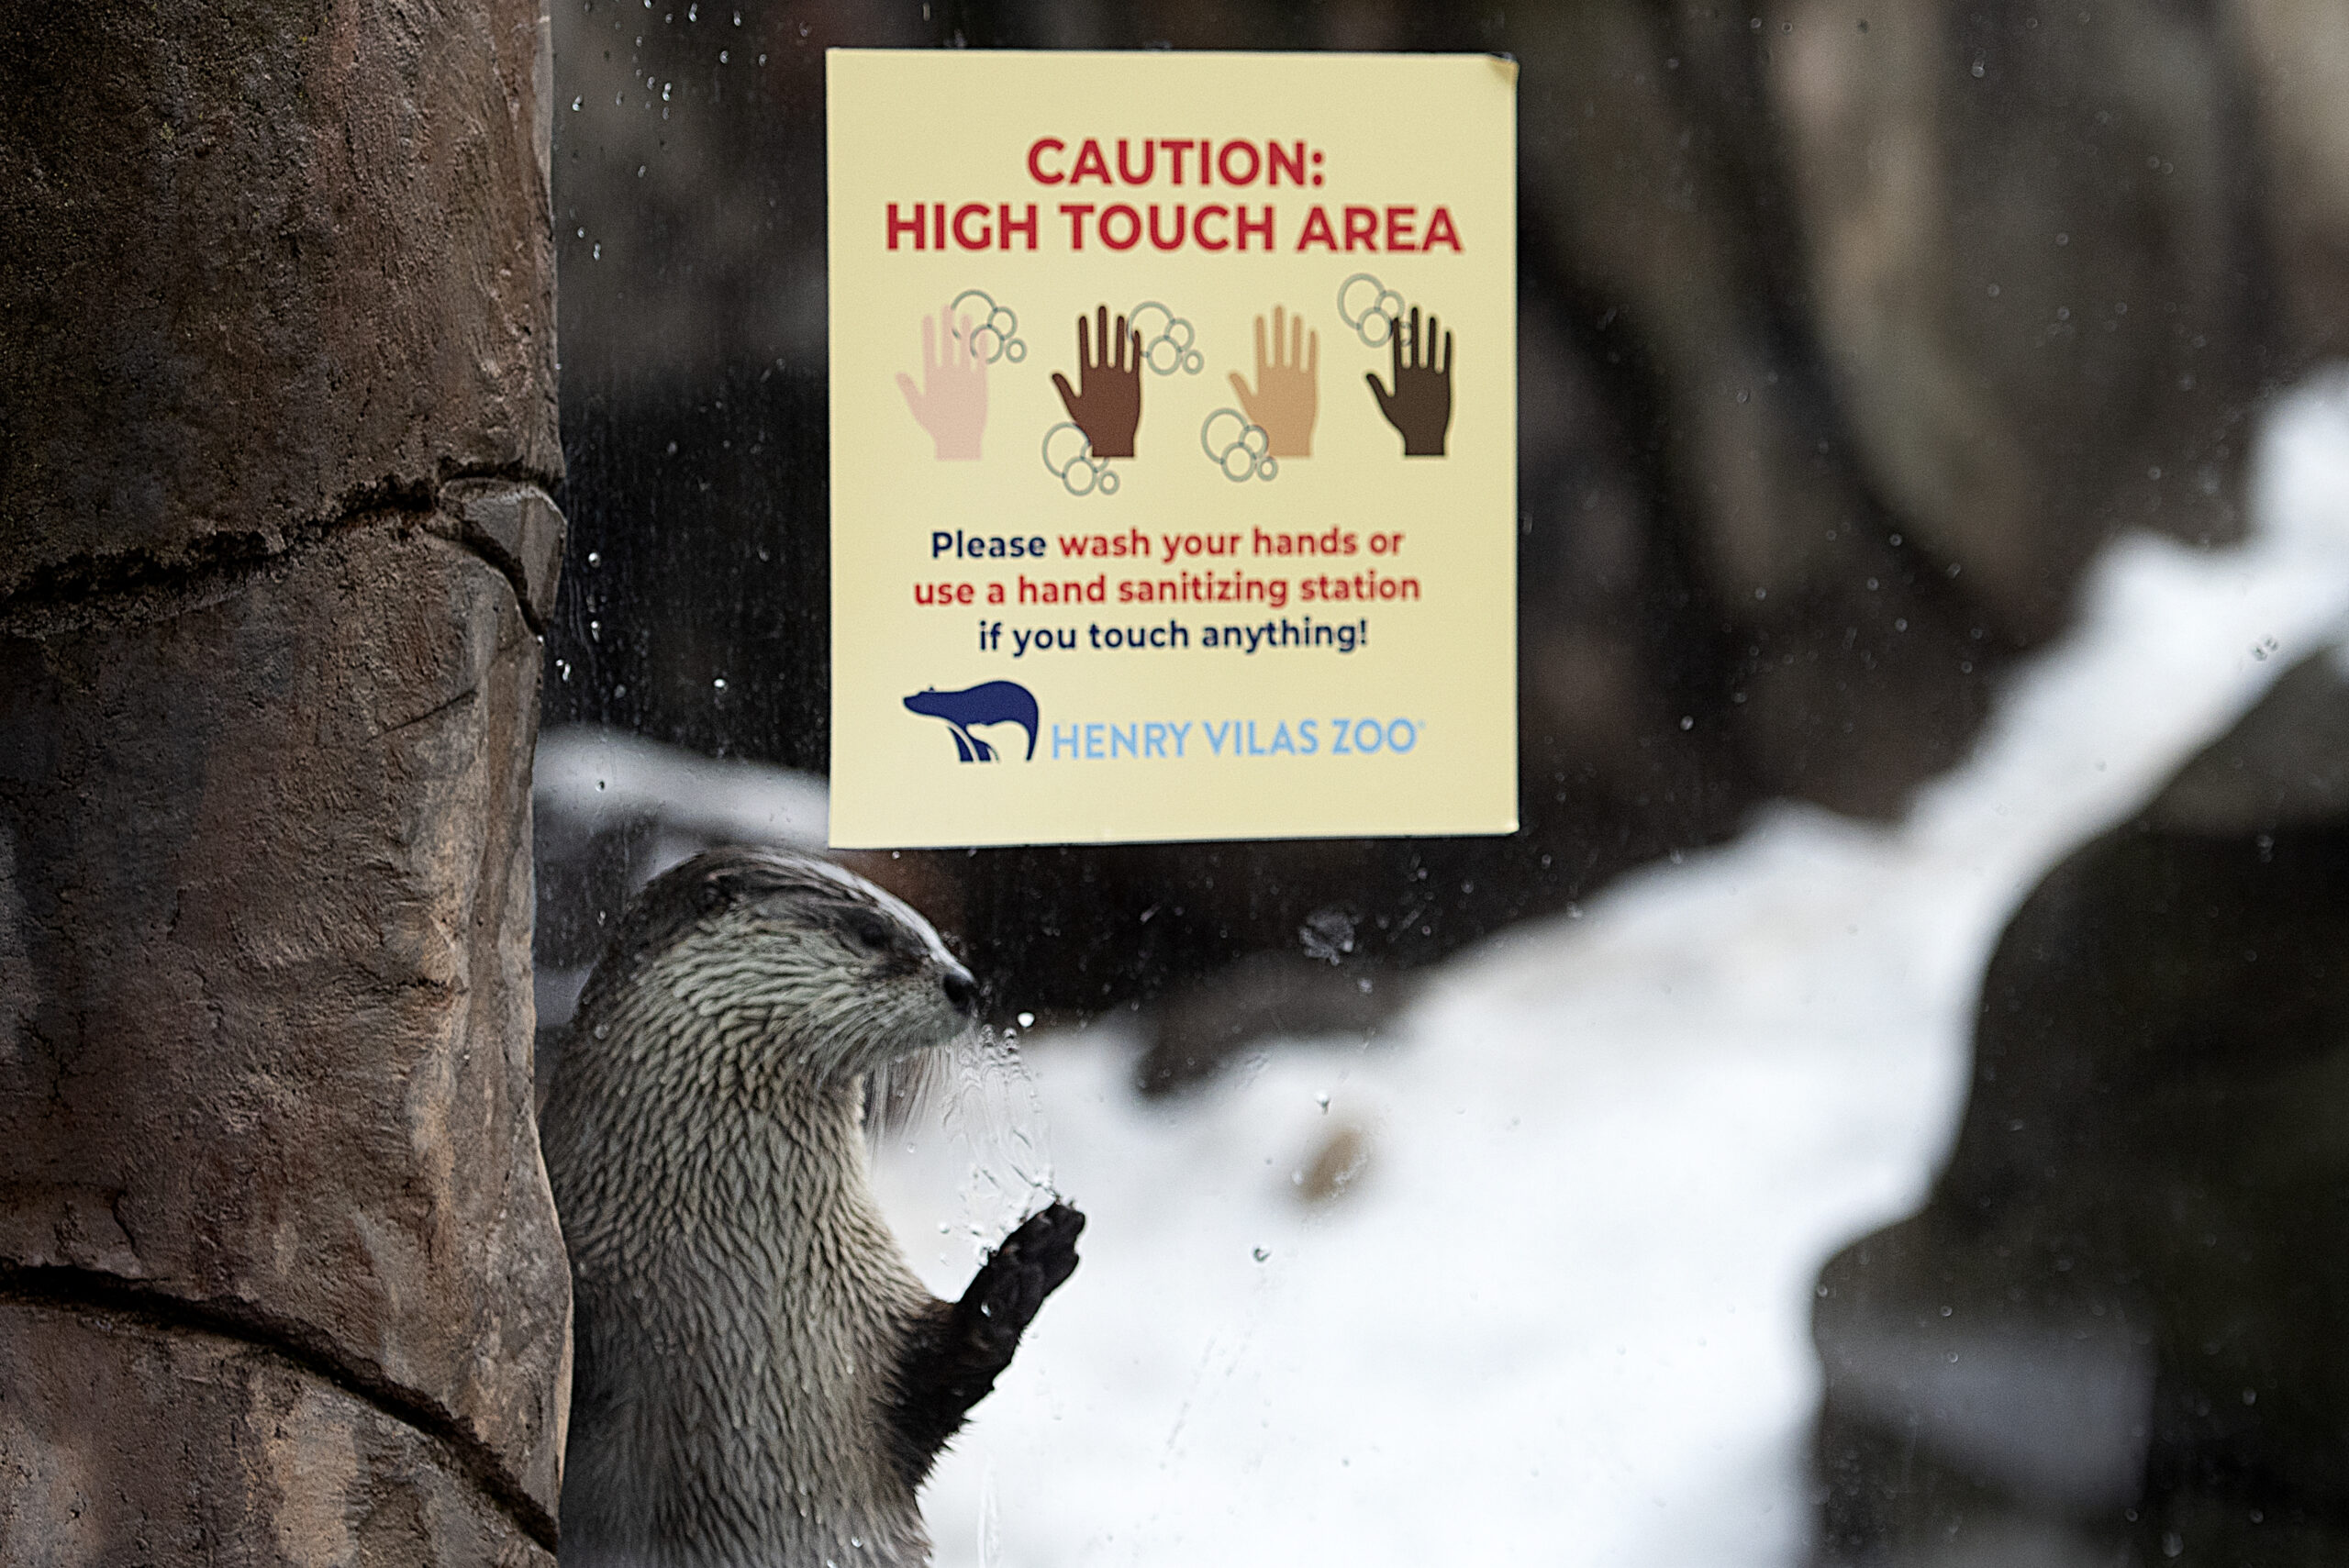 An otter reaches out to the glass. A sign says "CAUTION, HIGH TOUCH AREA"